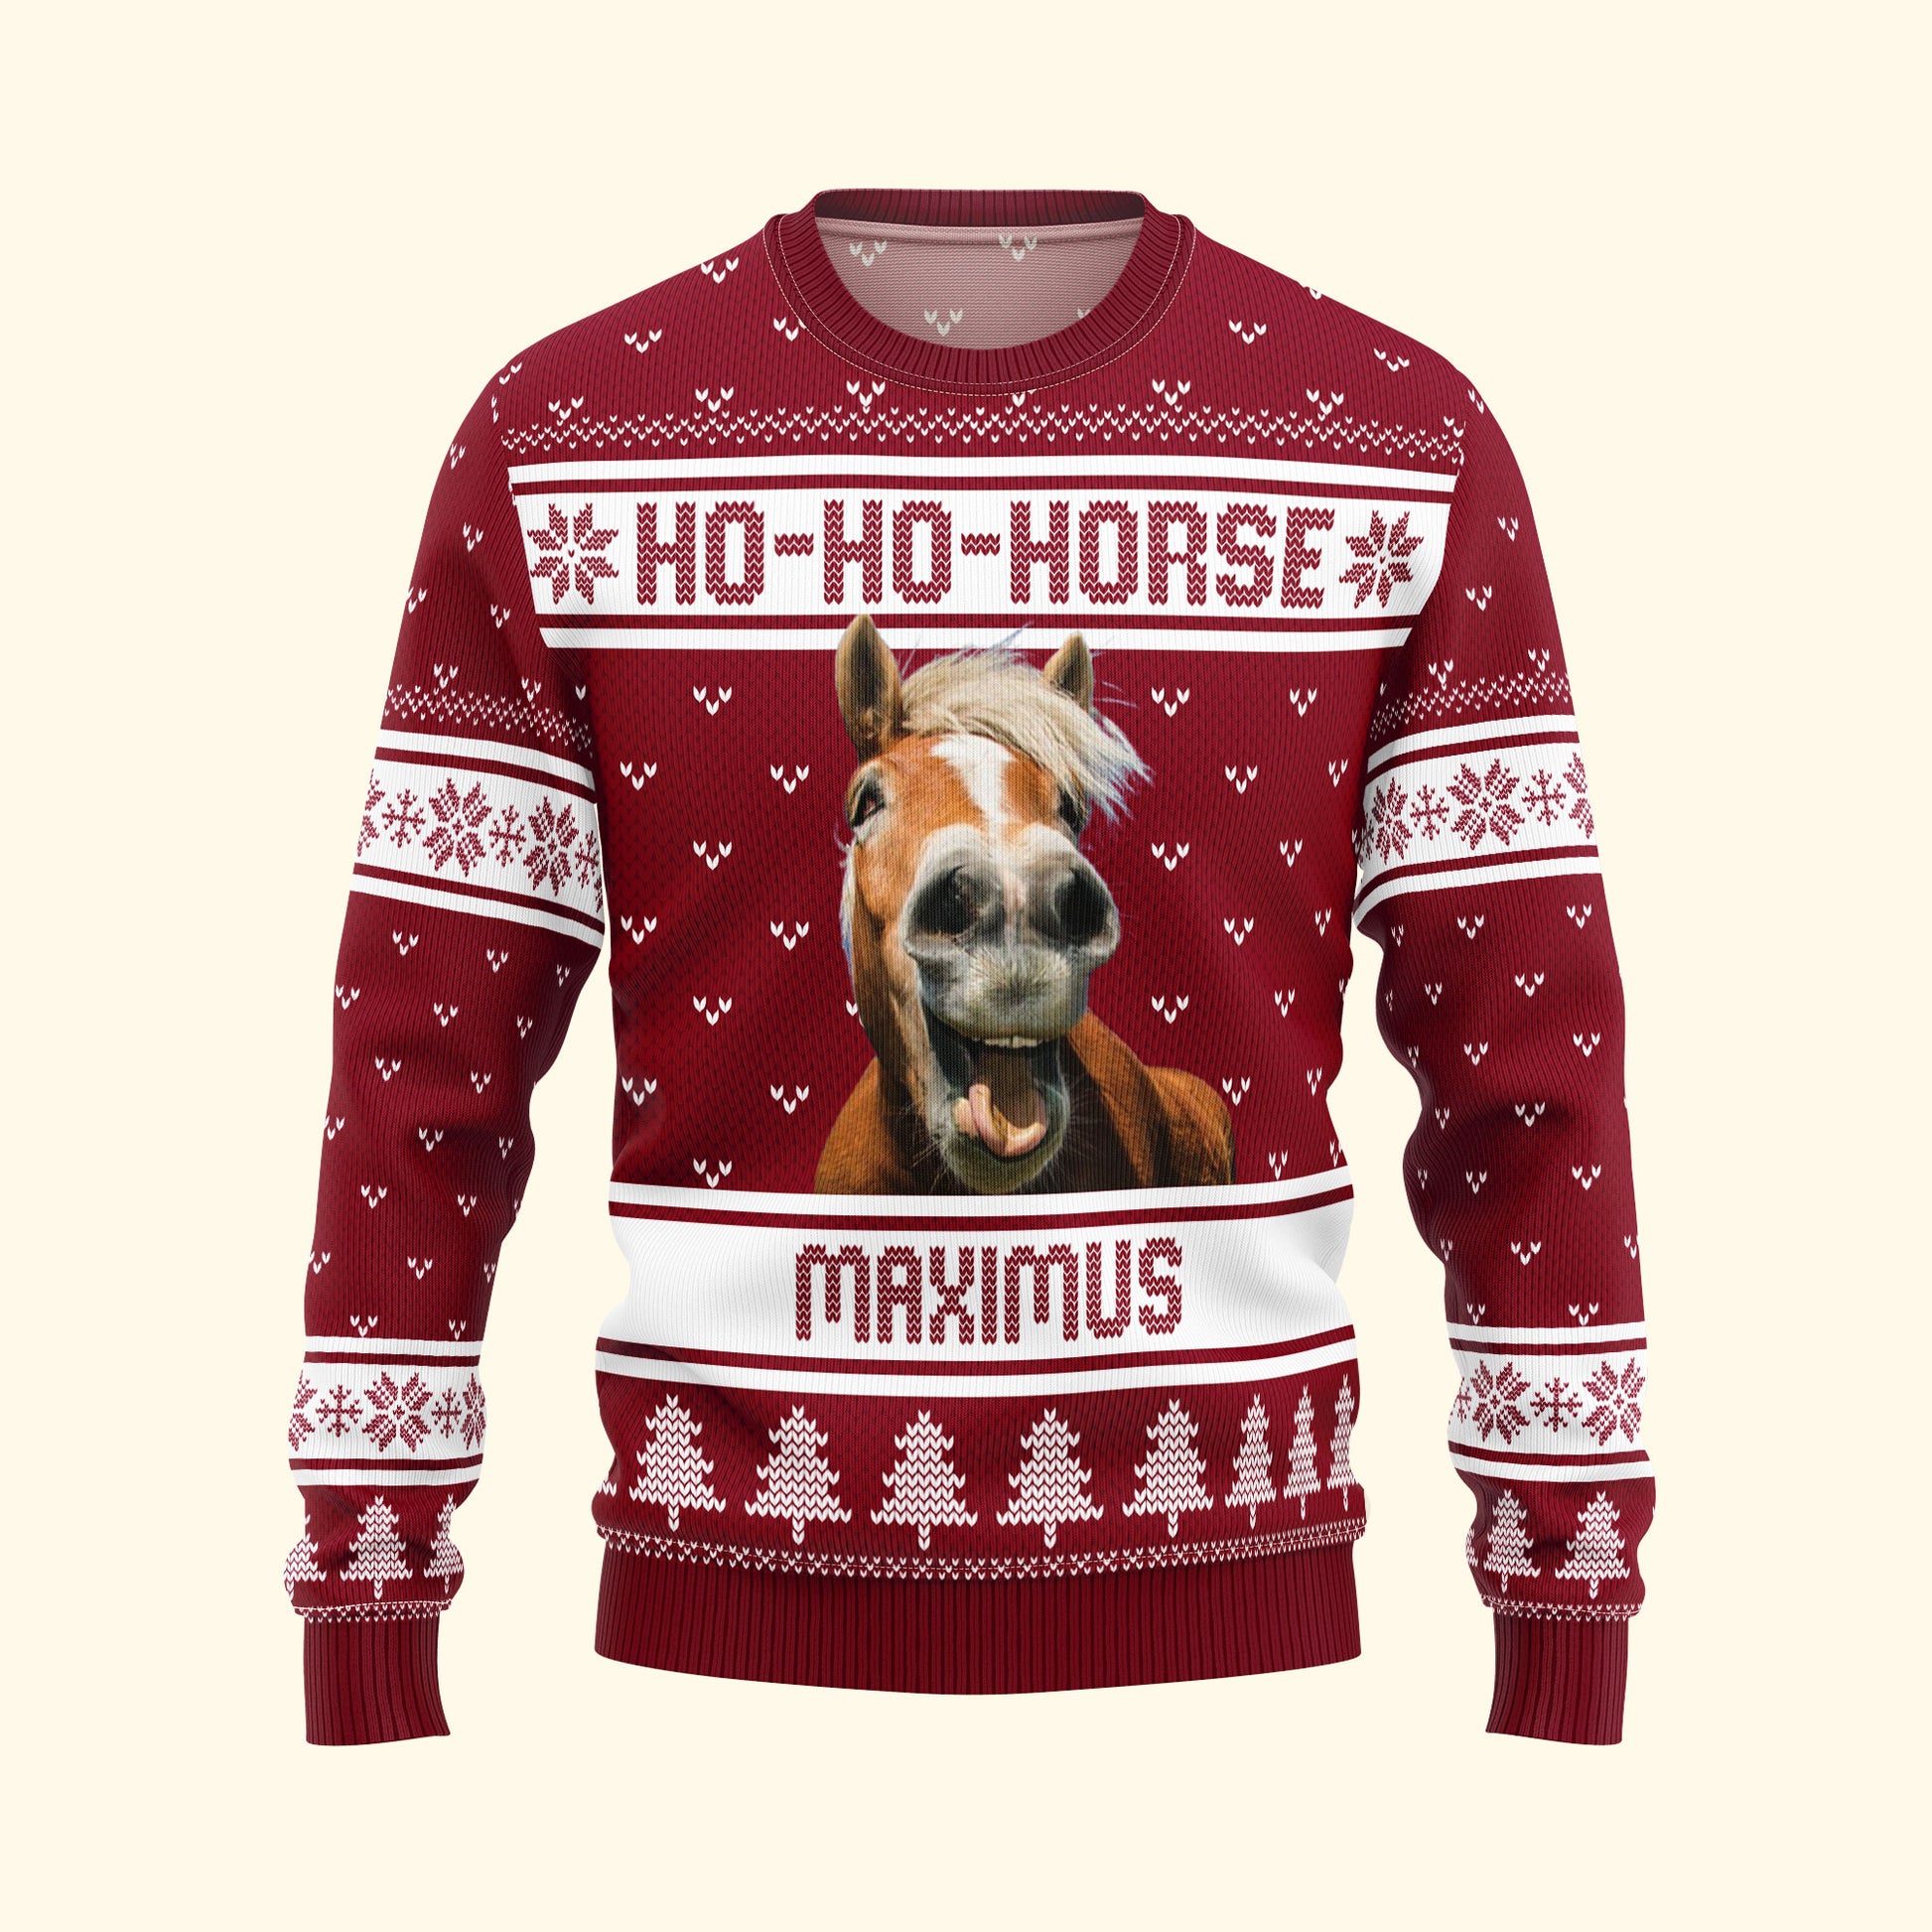 Ho-Ho-Horse - Personalized Ugly Sweater - Christmas Gift For Horse Lover, Horse Owner